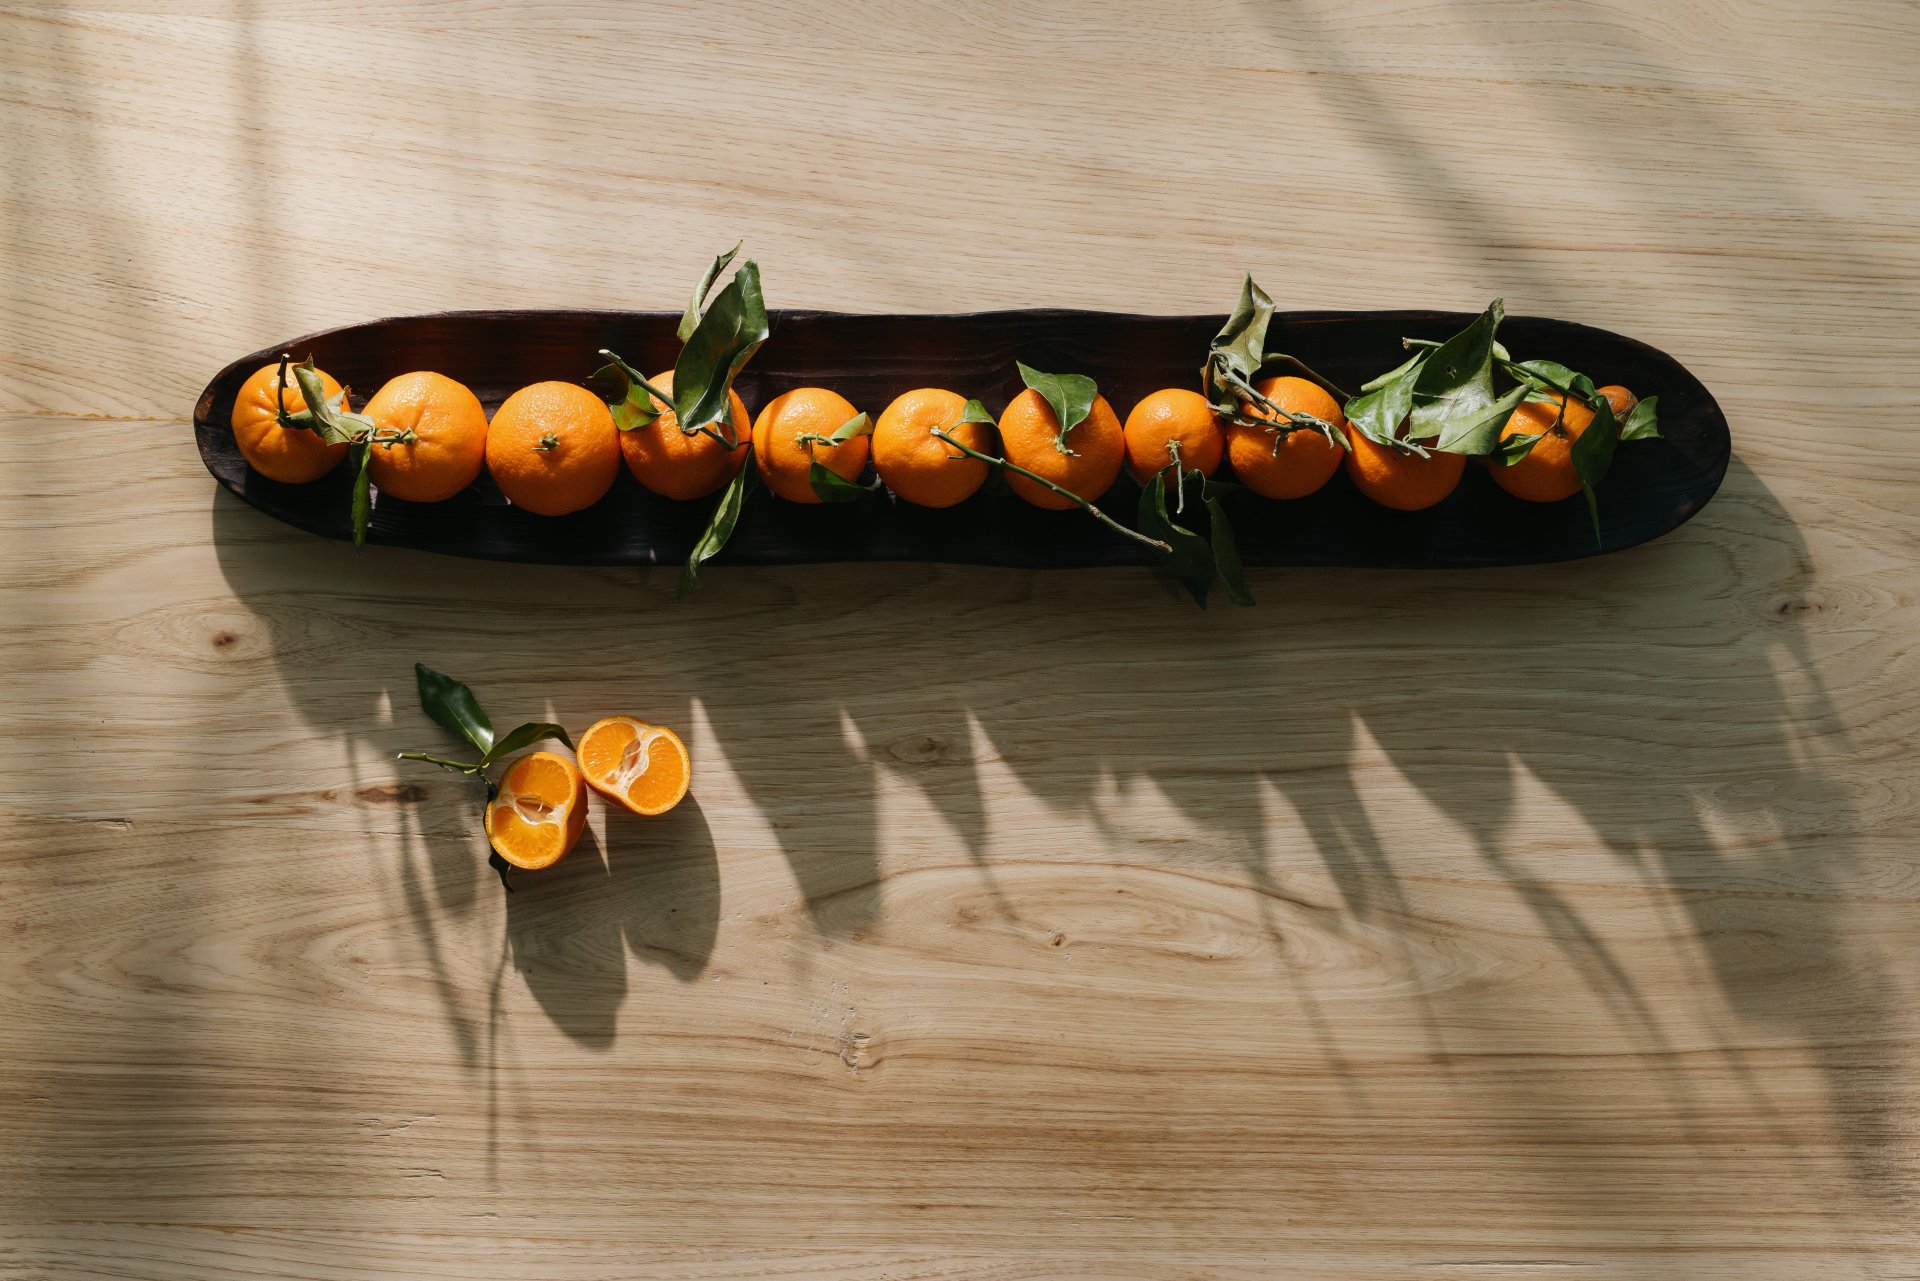 A tray of tangerines on a wooden table.